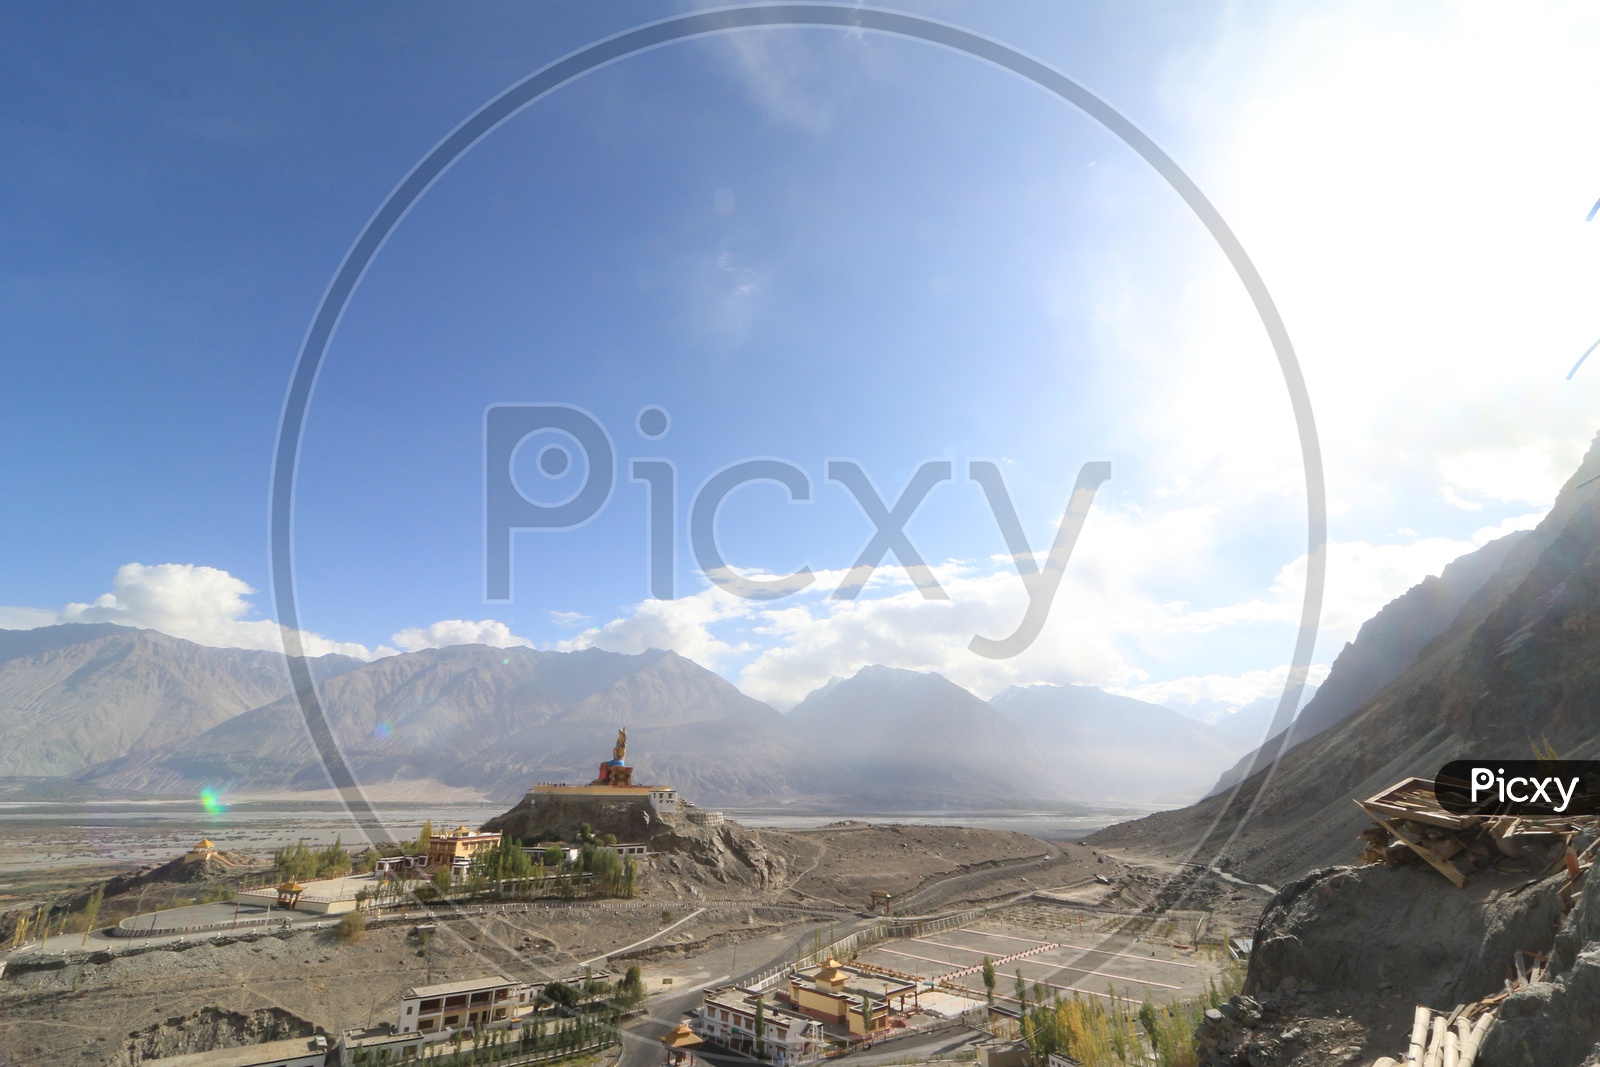 Buddha Statue with beautiful mountains in the background in leh